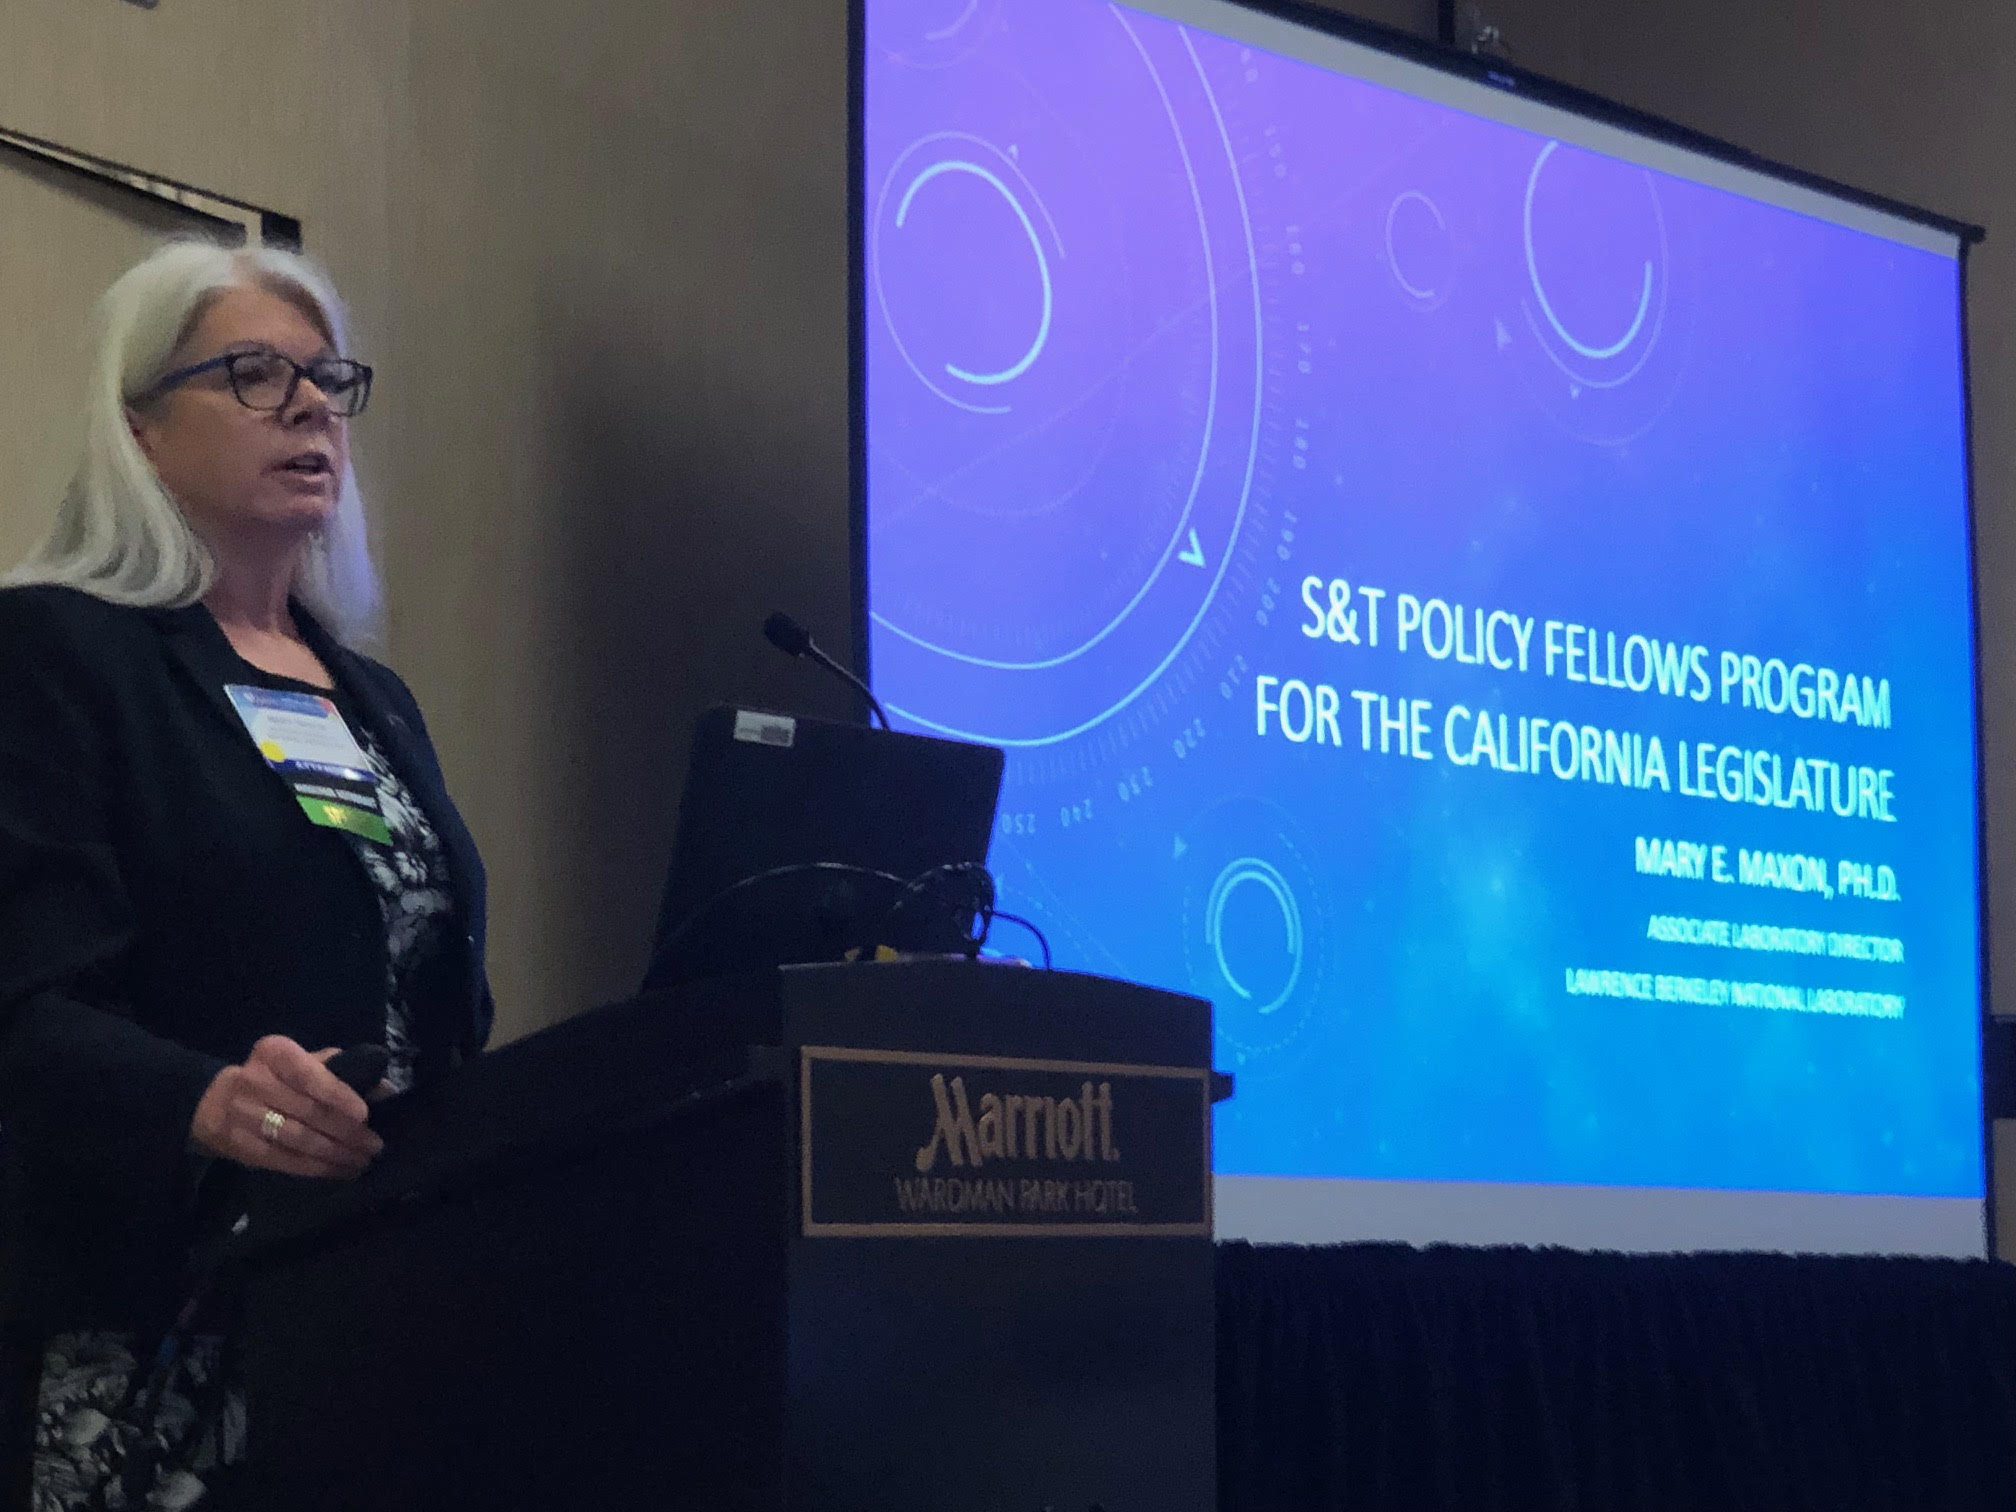 Mary Maxon speaking at the American Association for the Advancement of Science (AAAS) conference